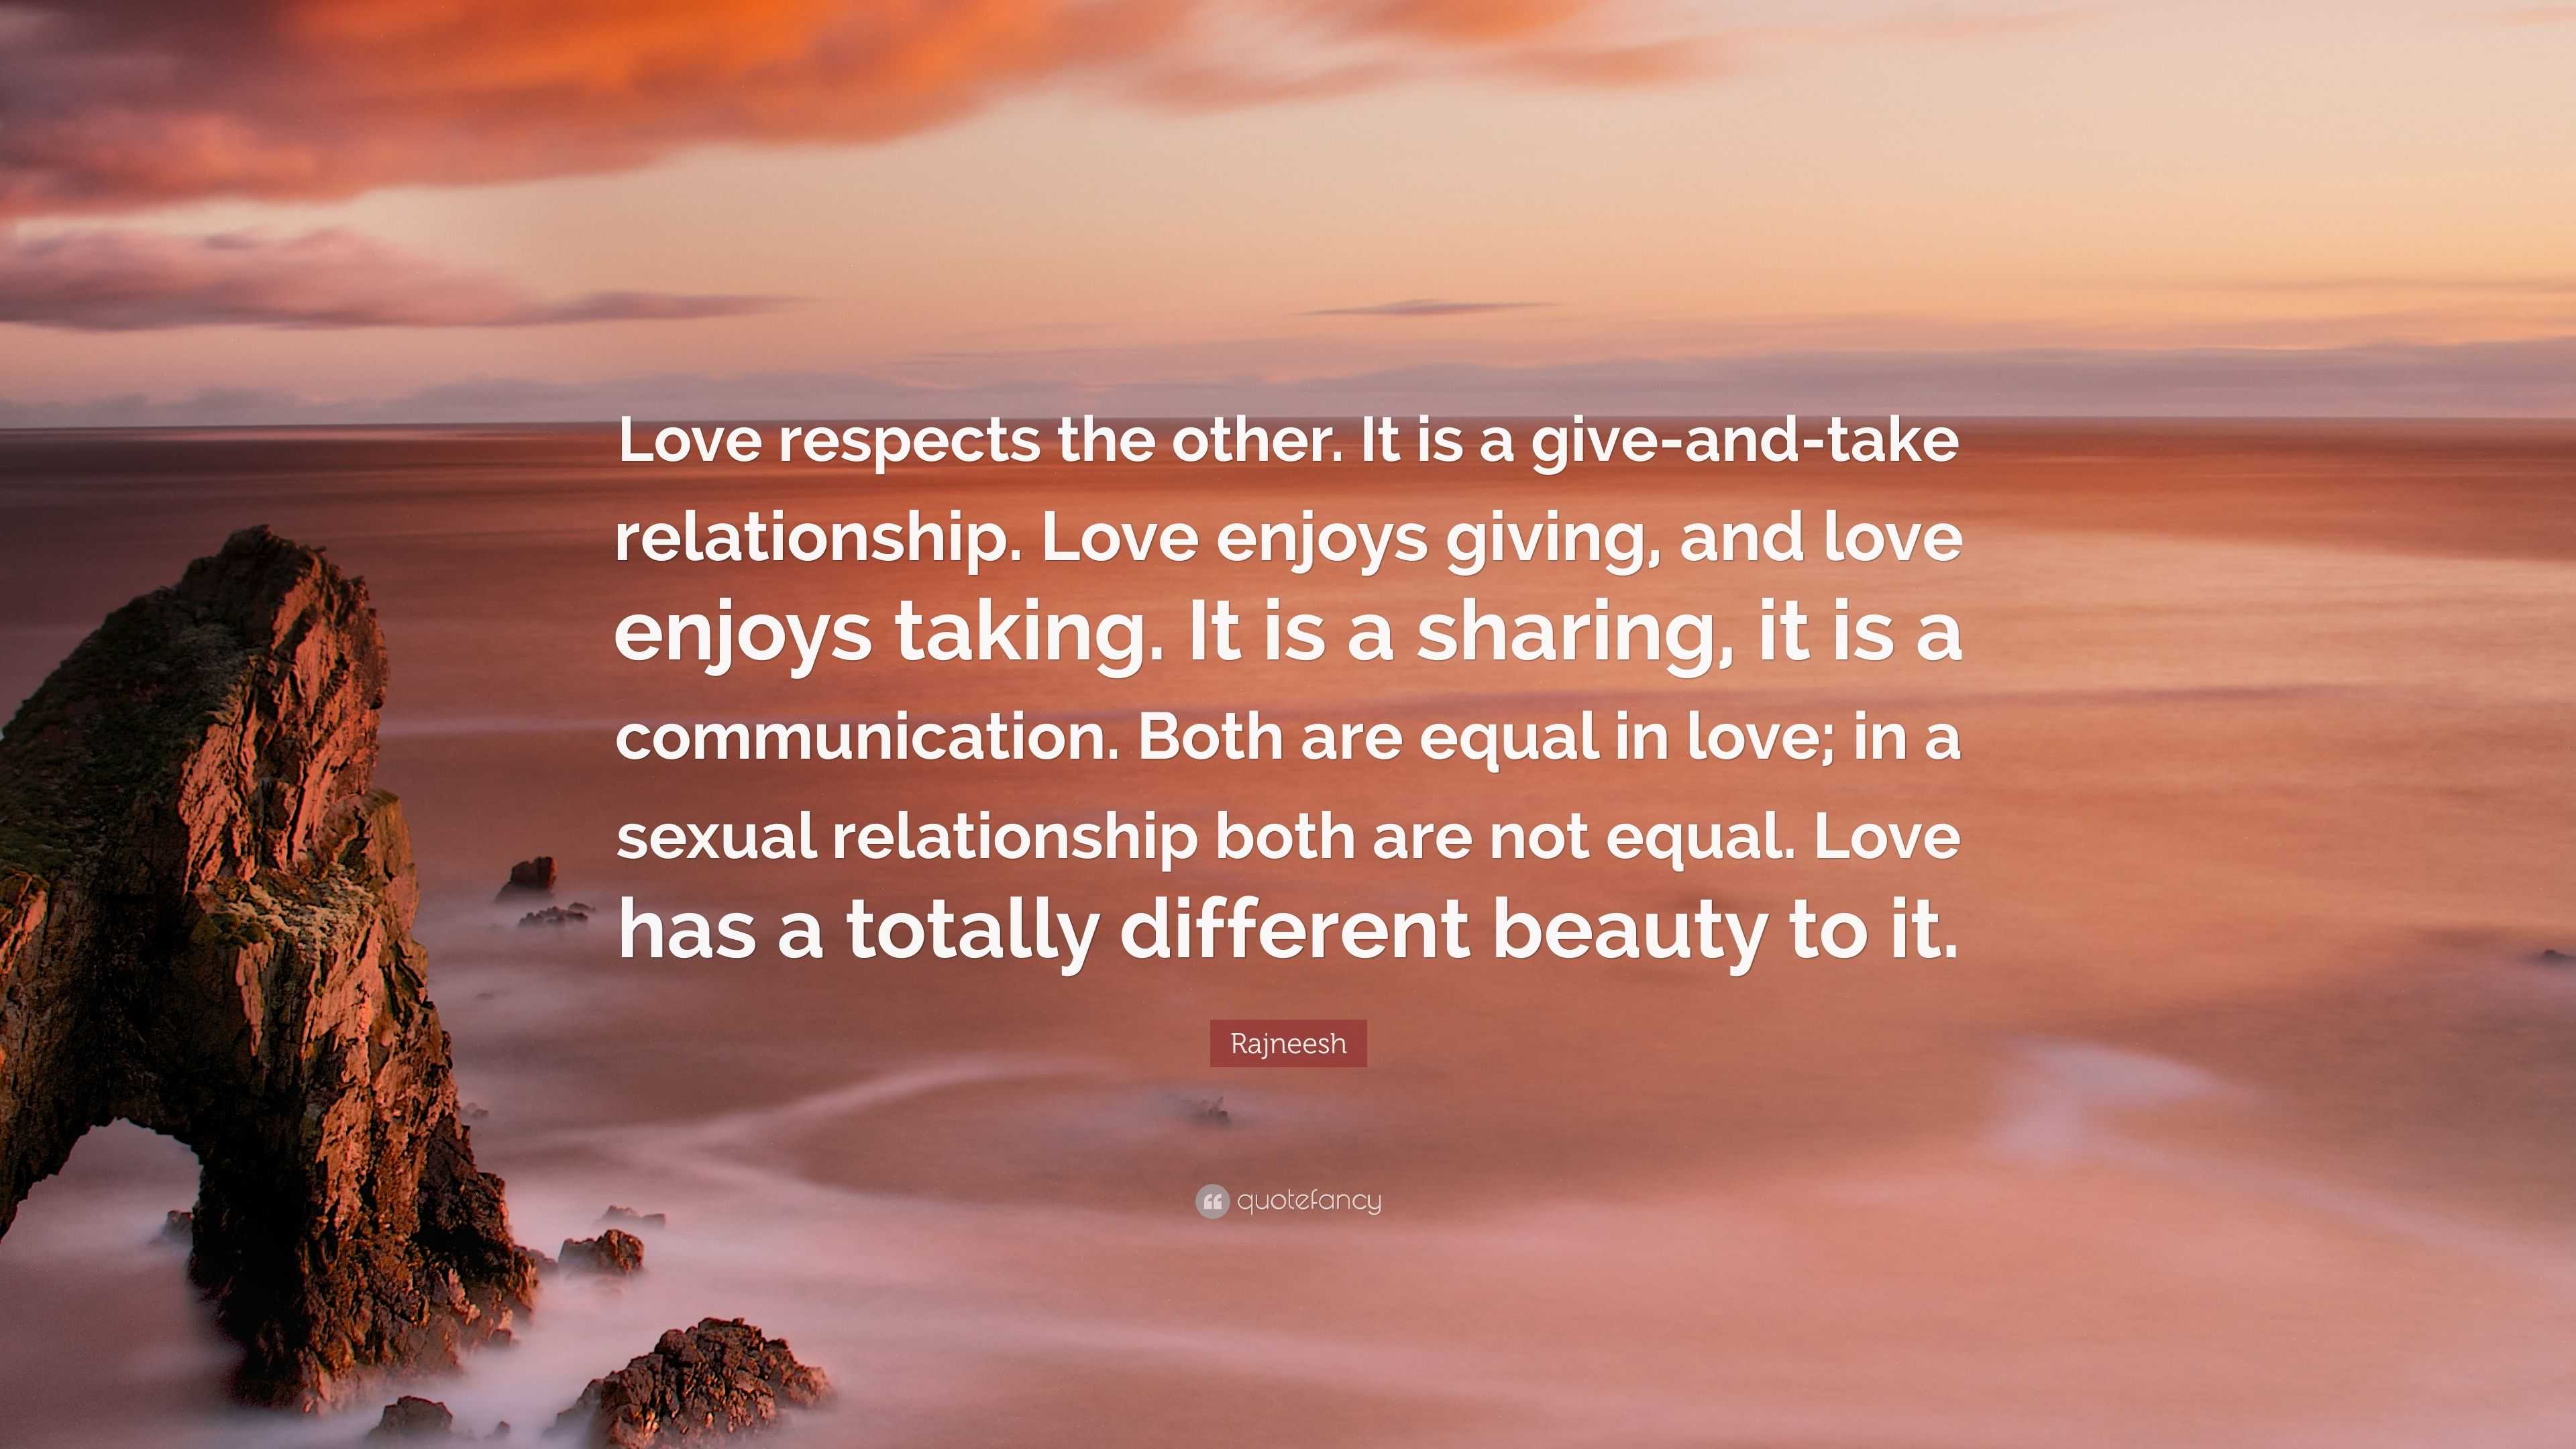 Rajneesh Quote: “Love respects the other. It is a give-and-take relationship.  Love enjoys giving, and love enjoys taking. It is a sharing...”